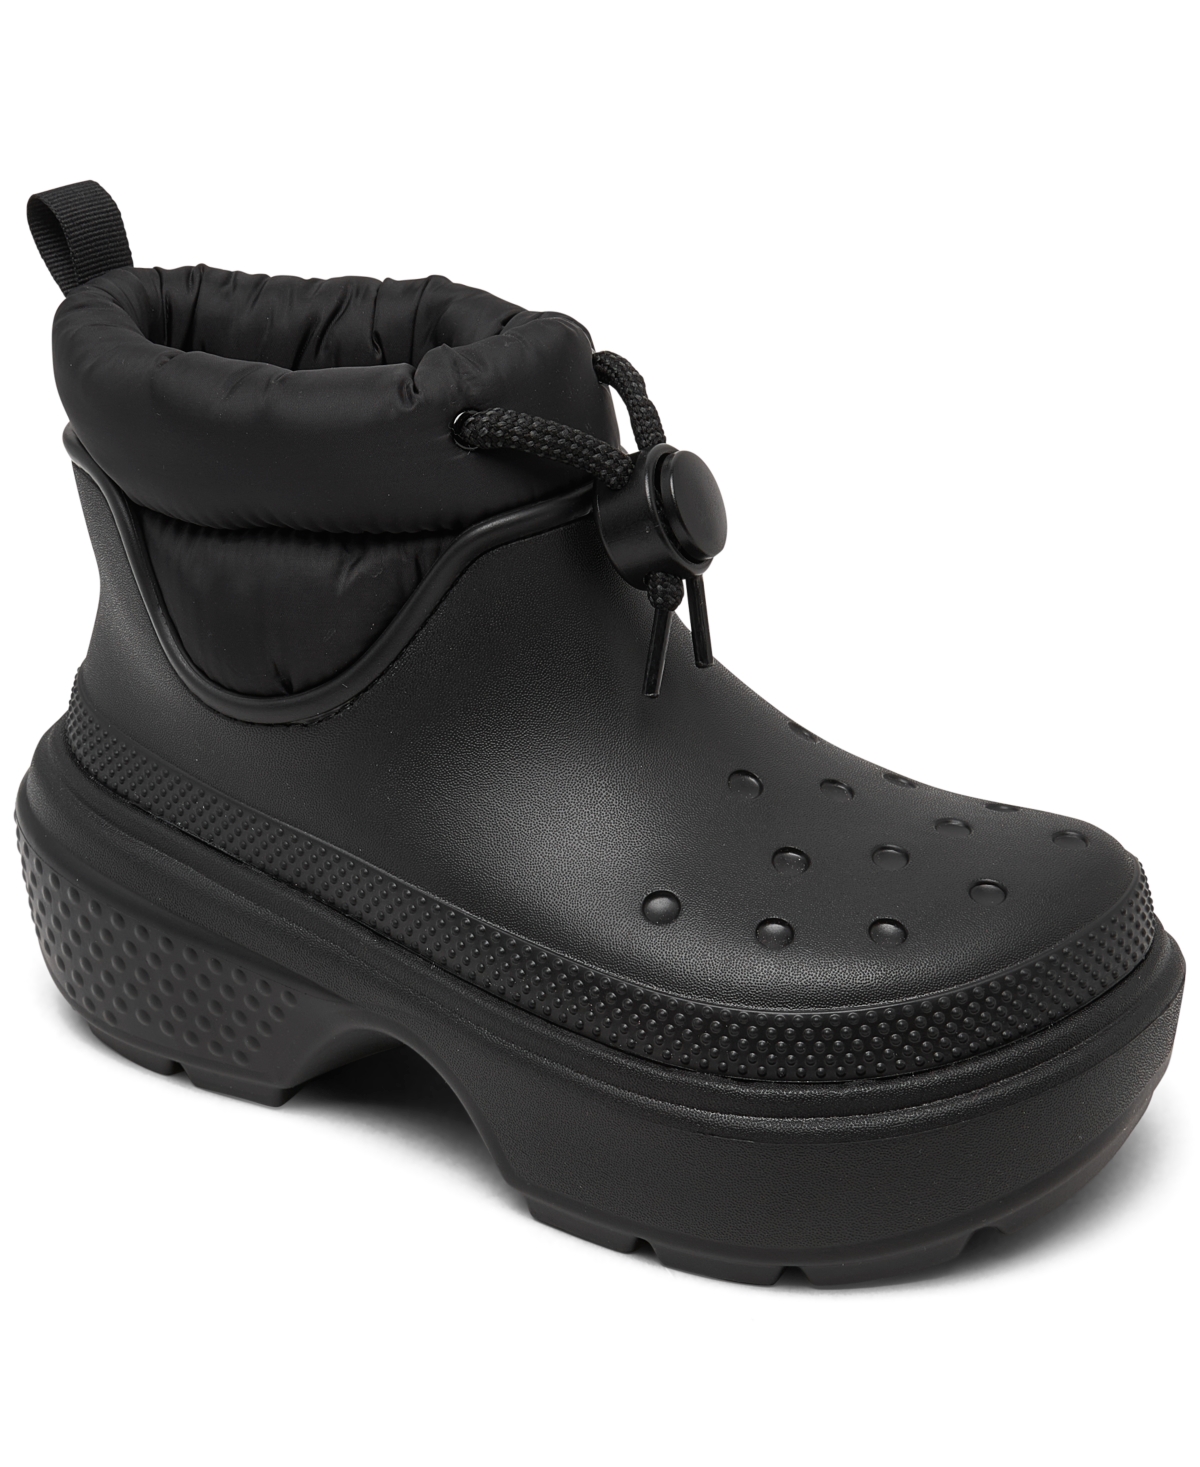 CROCS WOMEN'S STOMP PUFF BOOTS FROM FINISH LINE